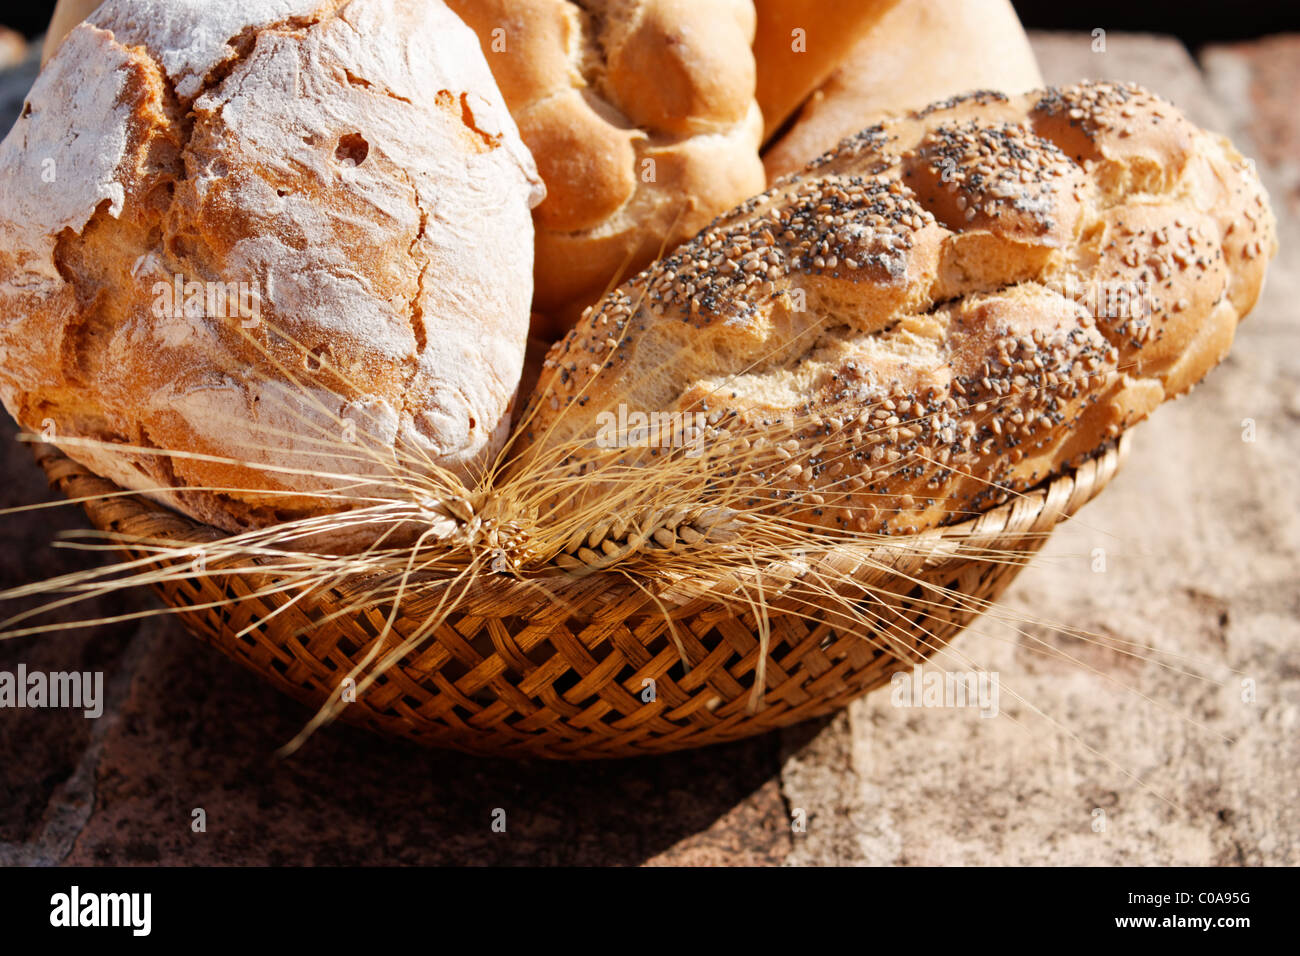 A close-up of a bread basket with a variety of breads and wheat on stone table. Stock Photo